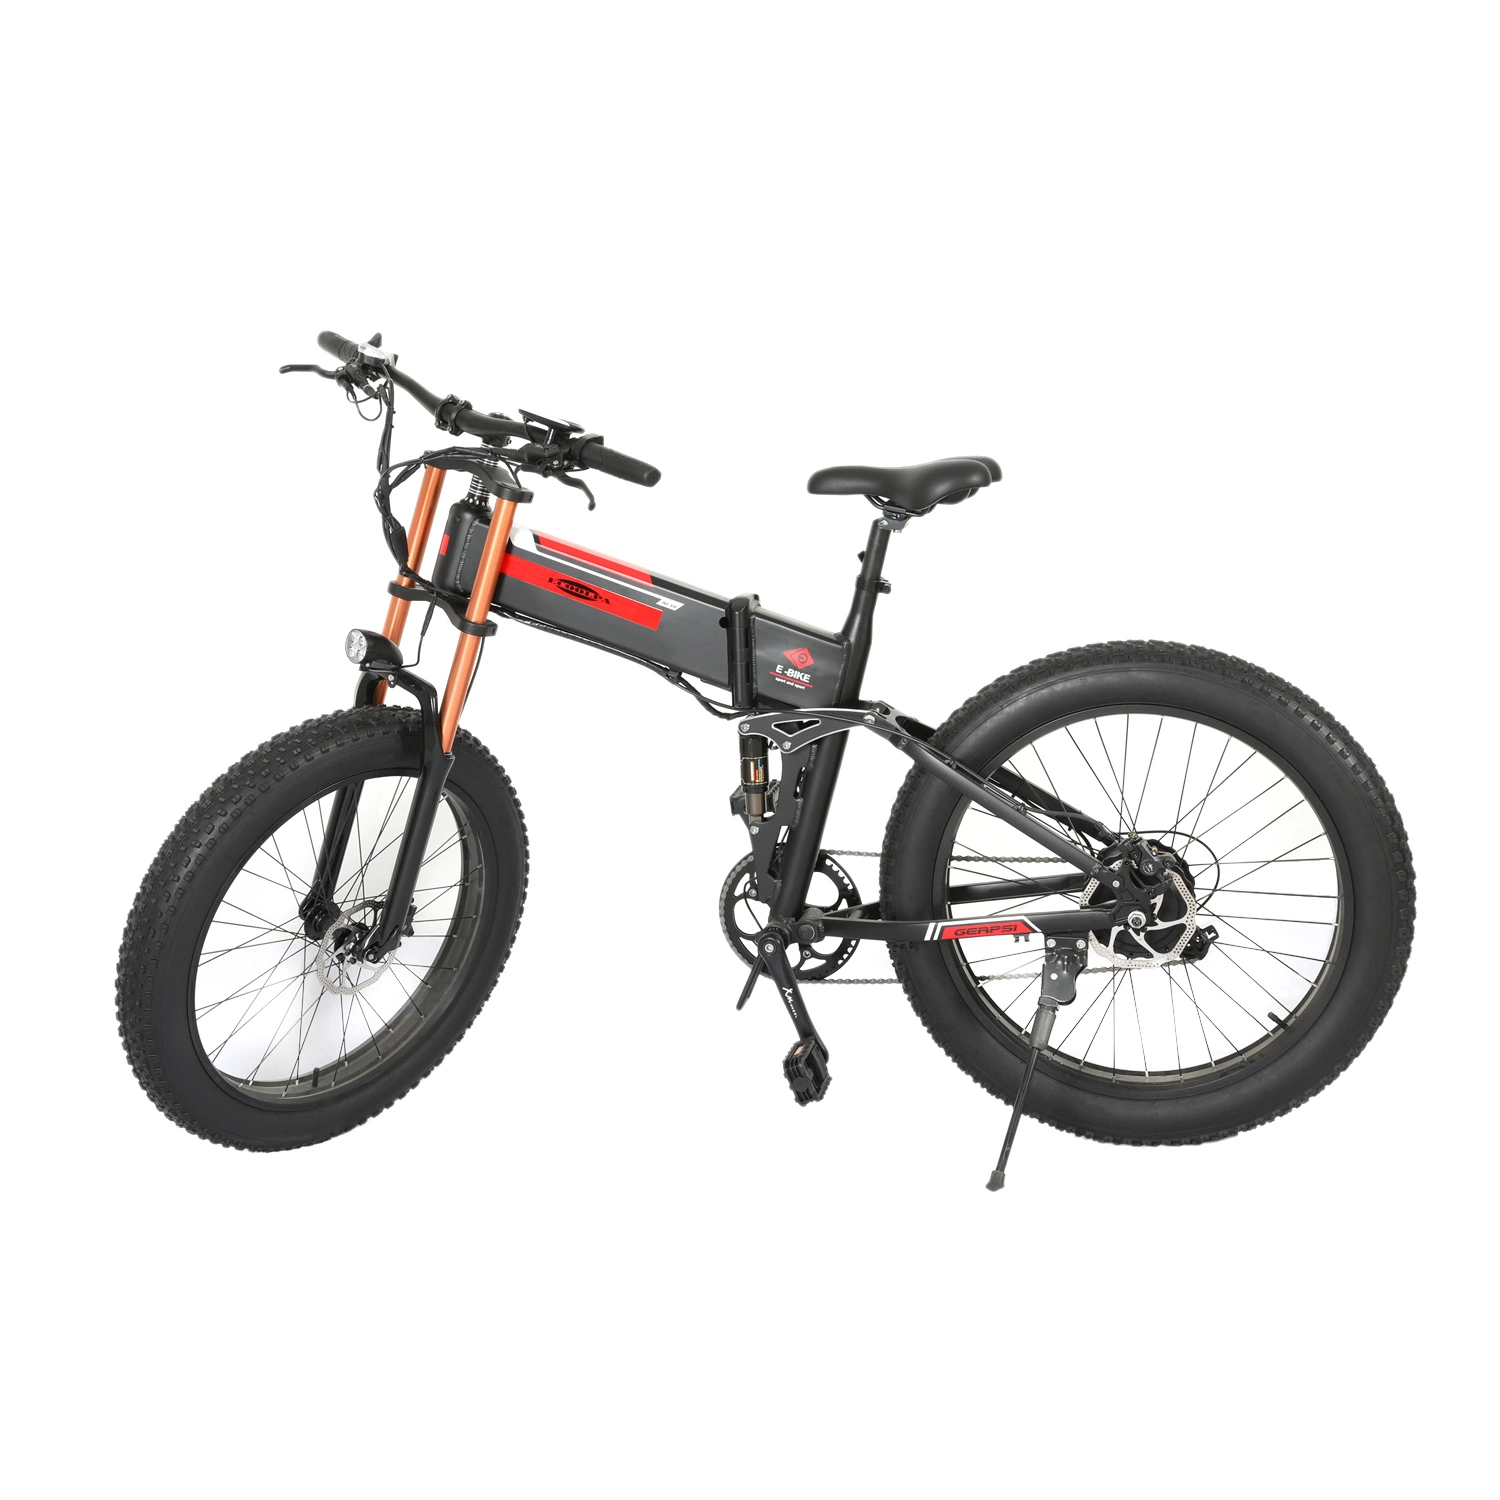 26inch Light Folding Bike Electric City Bicycle Electric Mountain Bike Vehicle Bicycle with 500W Brushless Motor 36V 8ah Battery Electric Vehicle Dirt Bike